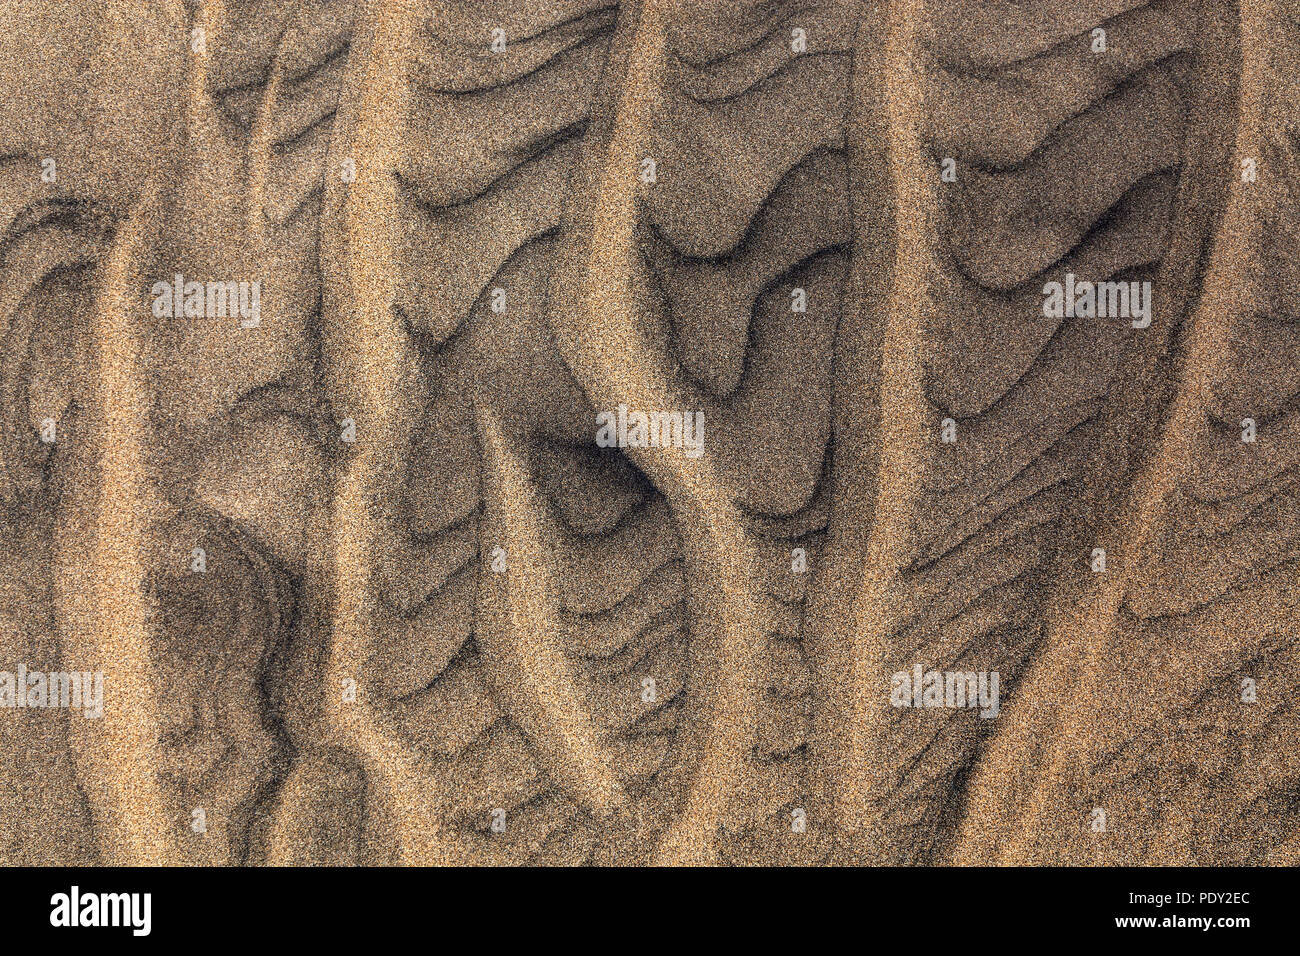 Wave pattern, structures in the sand on the sandy beach, Playa del Ingles, Gran Canaria, Canary Islands, Spain Stock Photo